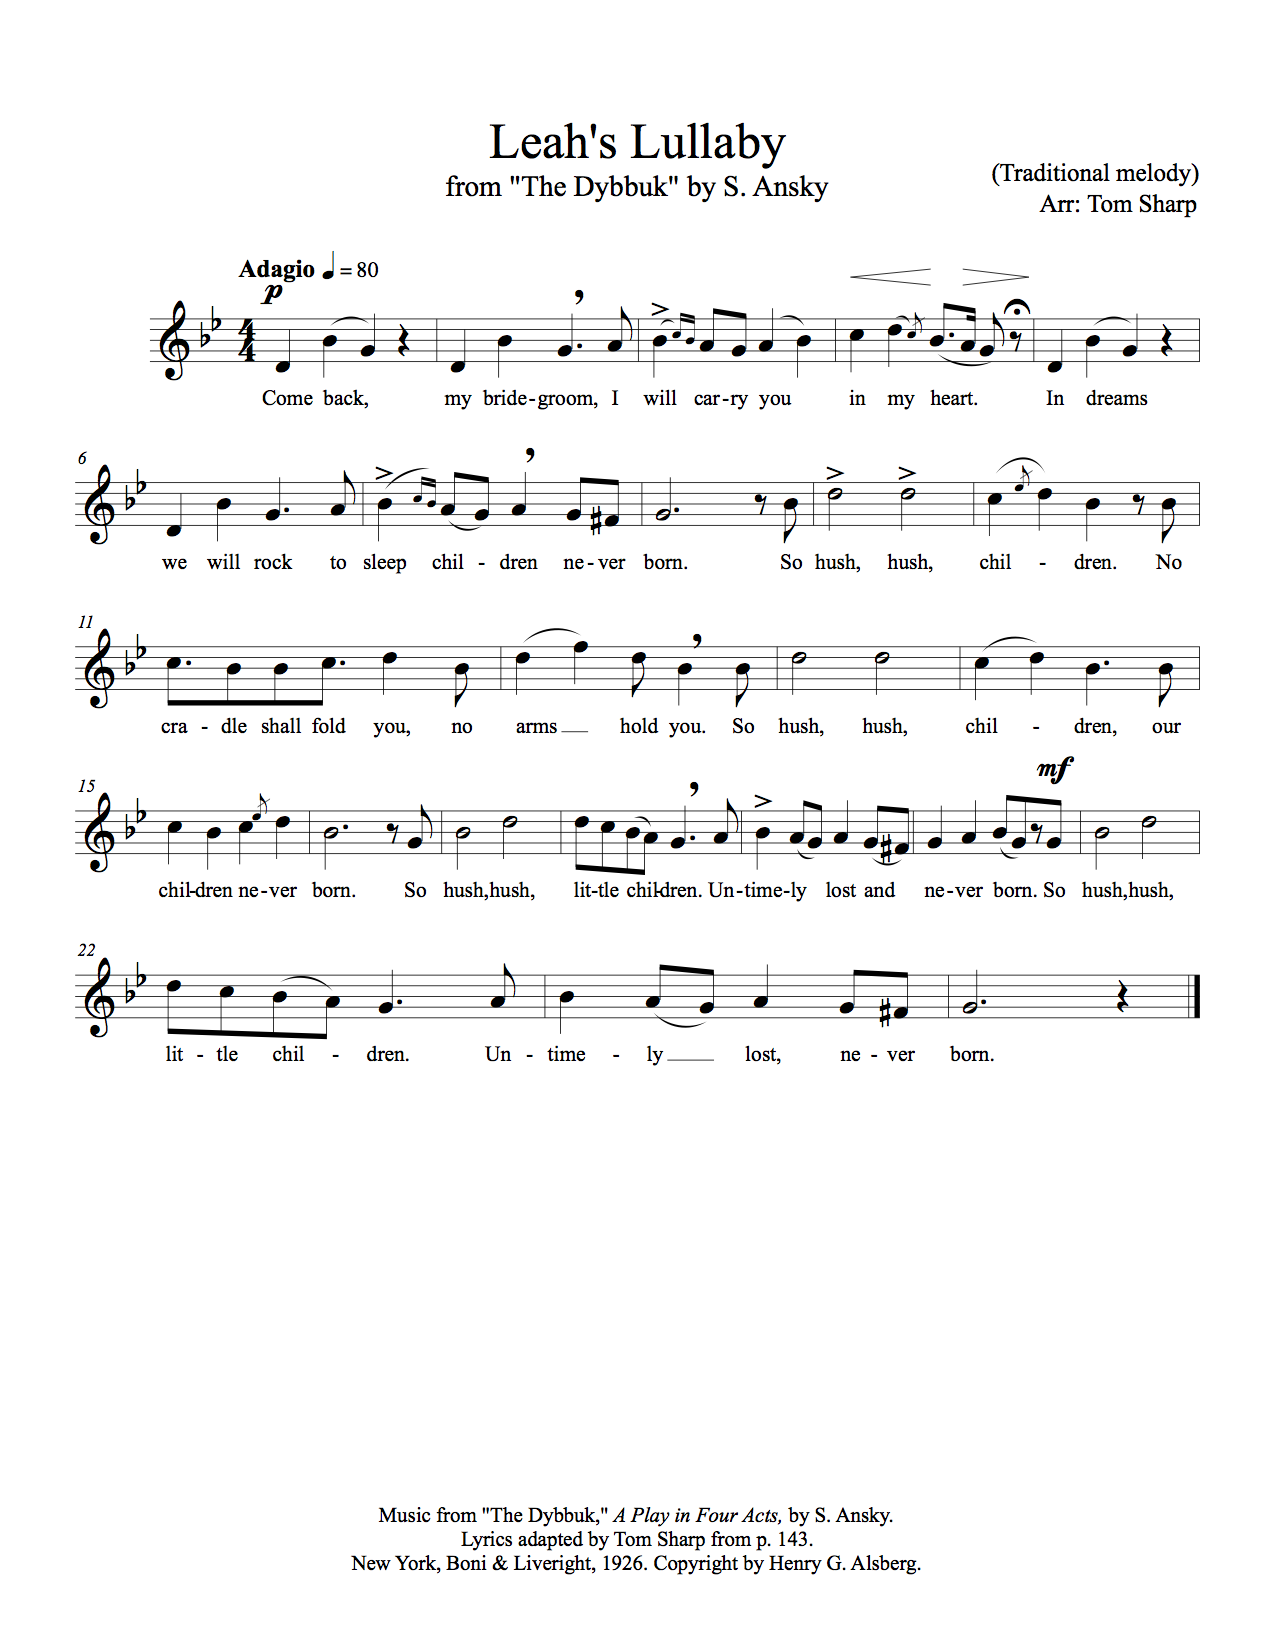 Score for Leah’s Lullaby